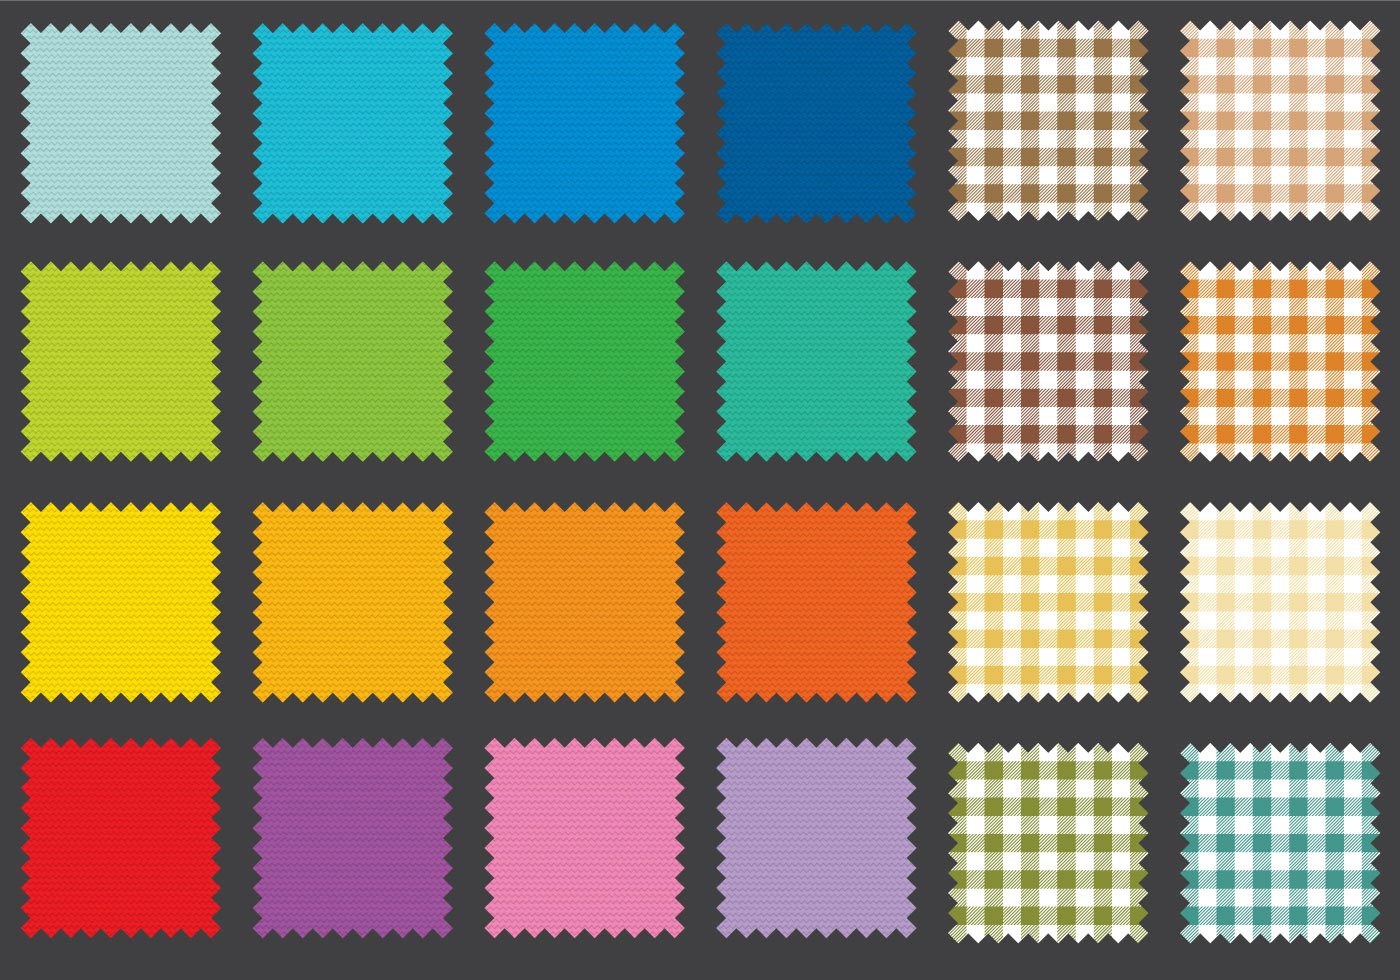 0 Result Images of Different Types Of Fabric Swatches - PNG Image ...